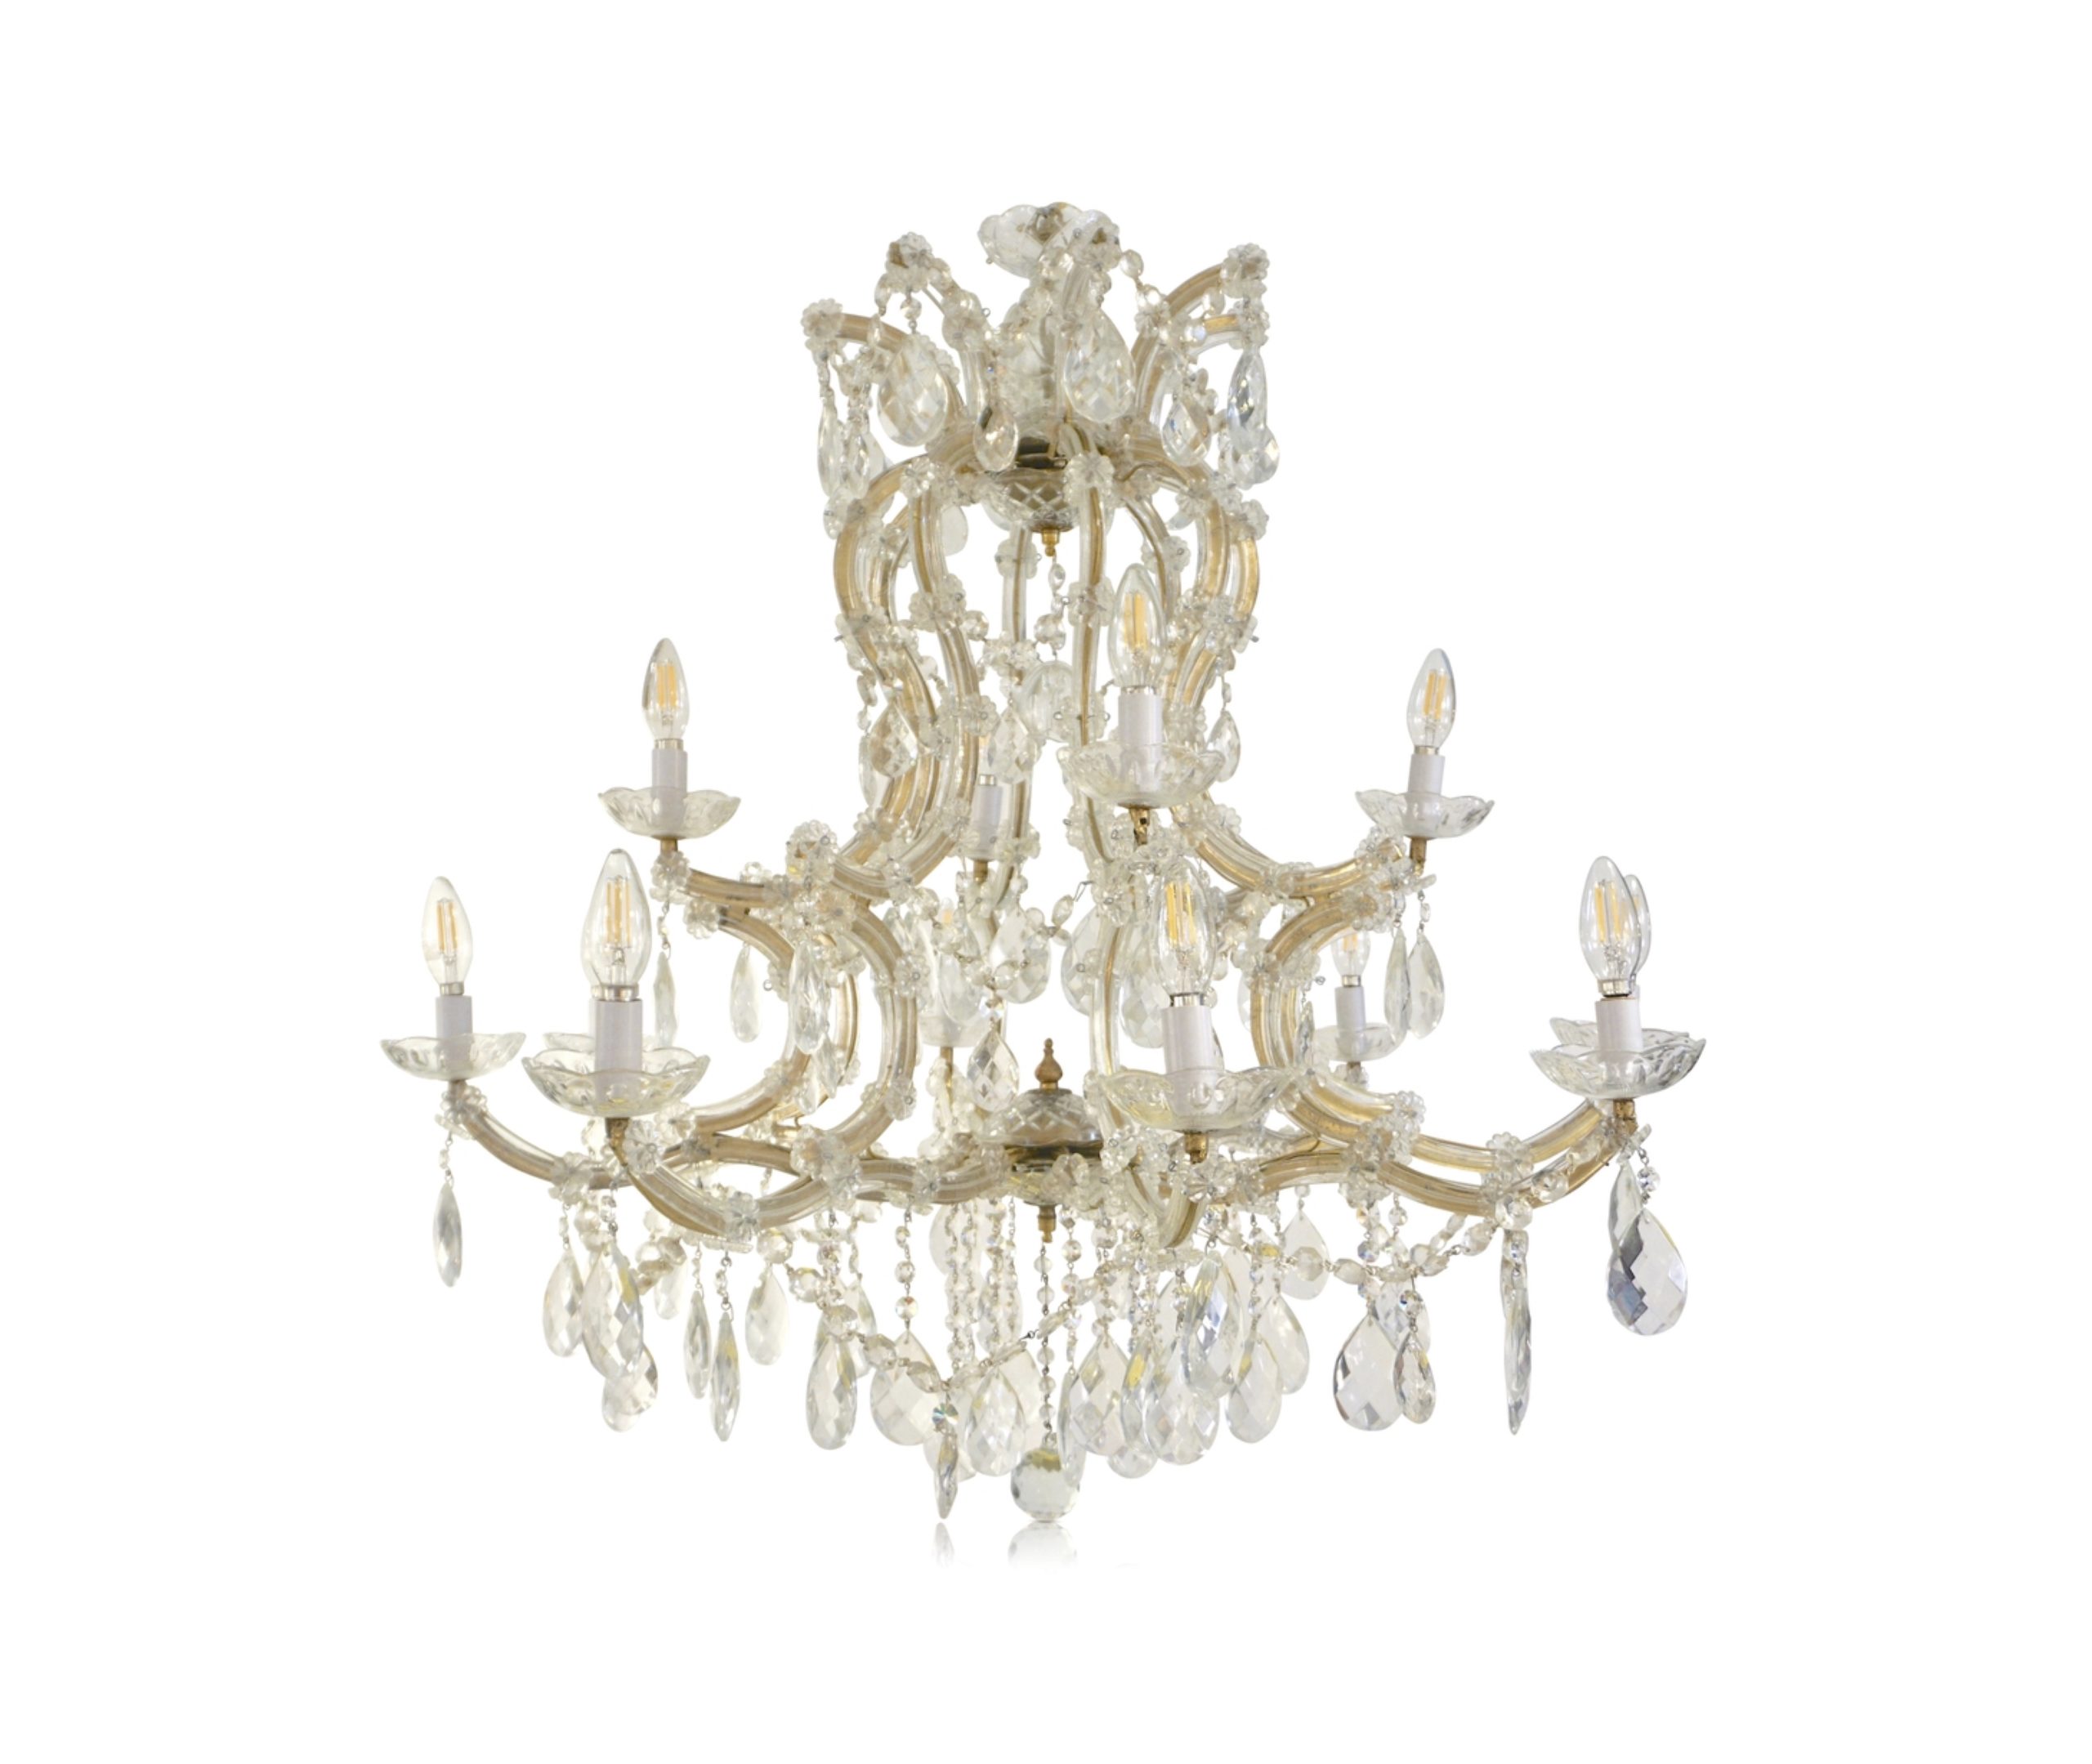 cosulich_interiors_and_antiques_products_new_york_design_1940s_italian_antique_baroque_revival_crystal_gilded_chandelier-scaled-1